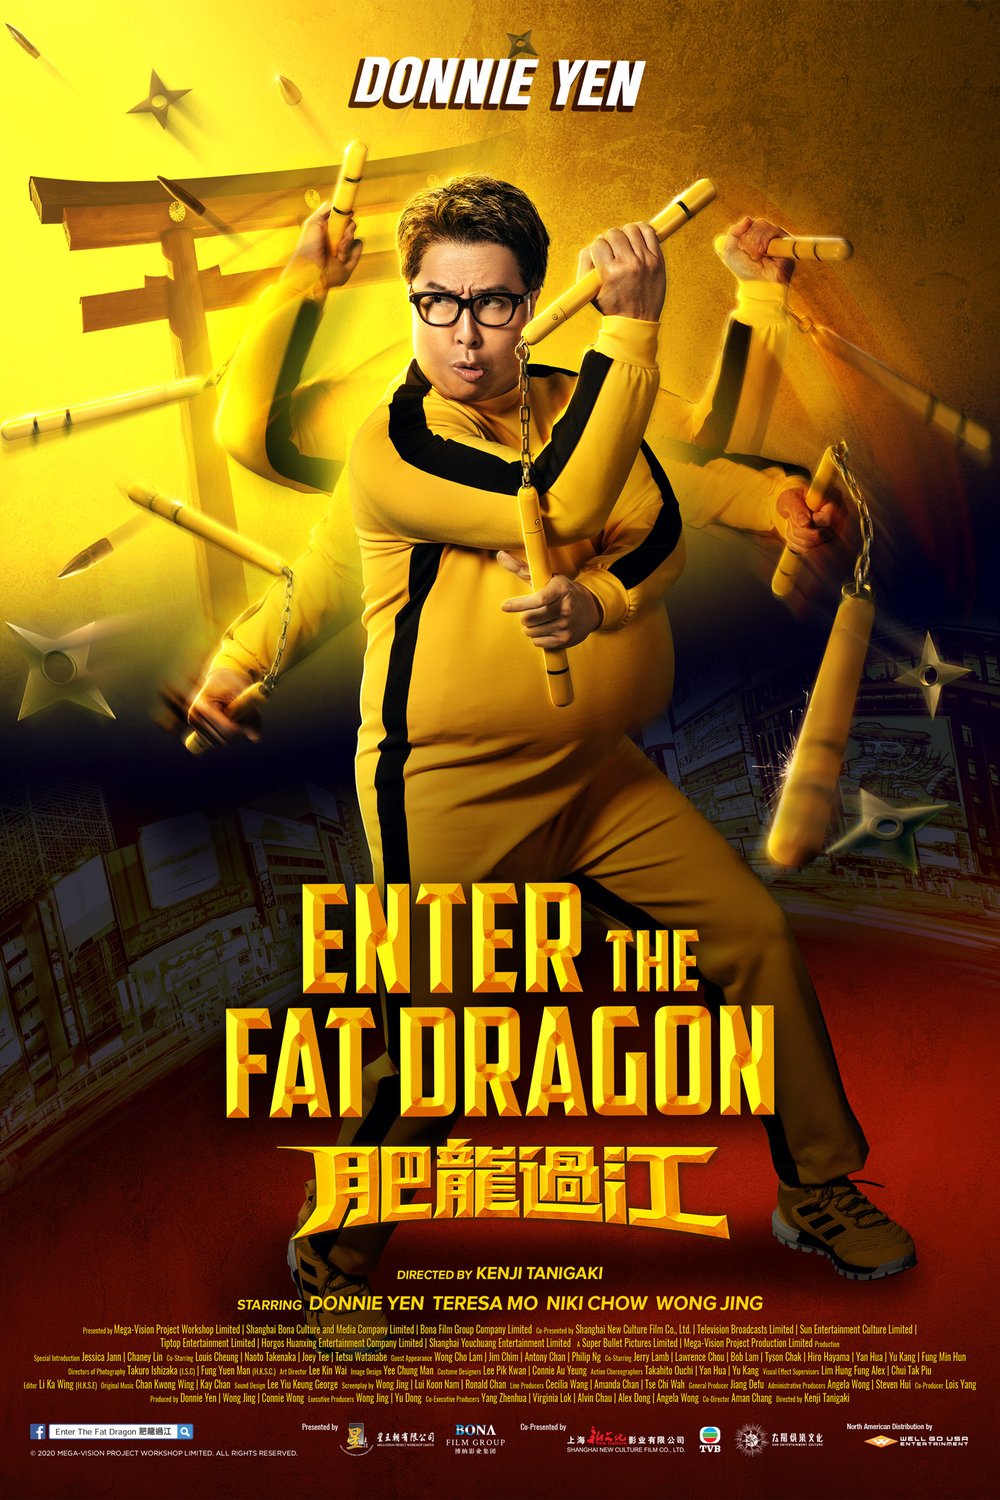 Poster of the movie Fei lung gwoh gong